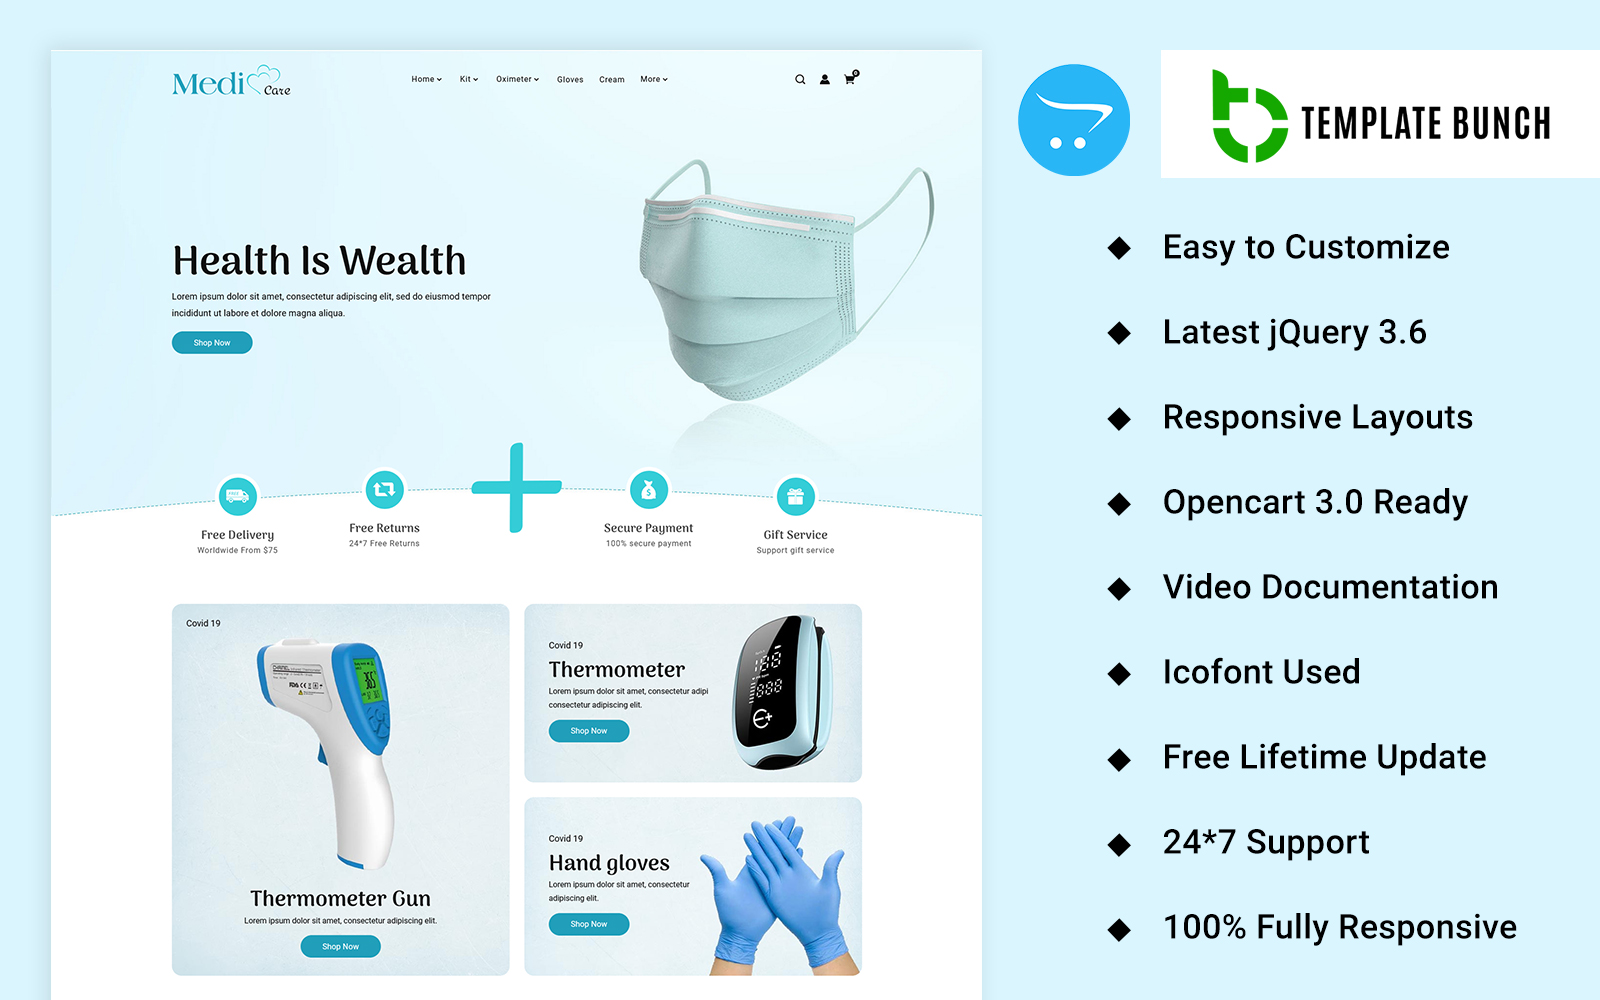 Medi Care - OpenCart Themes and Website Templates for eCommerce Website Design